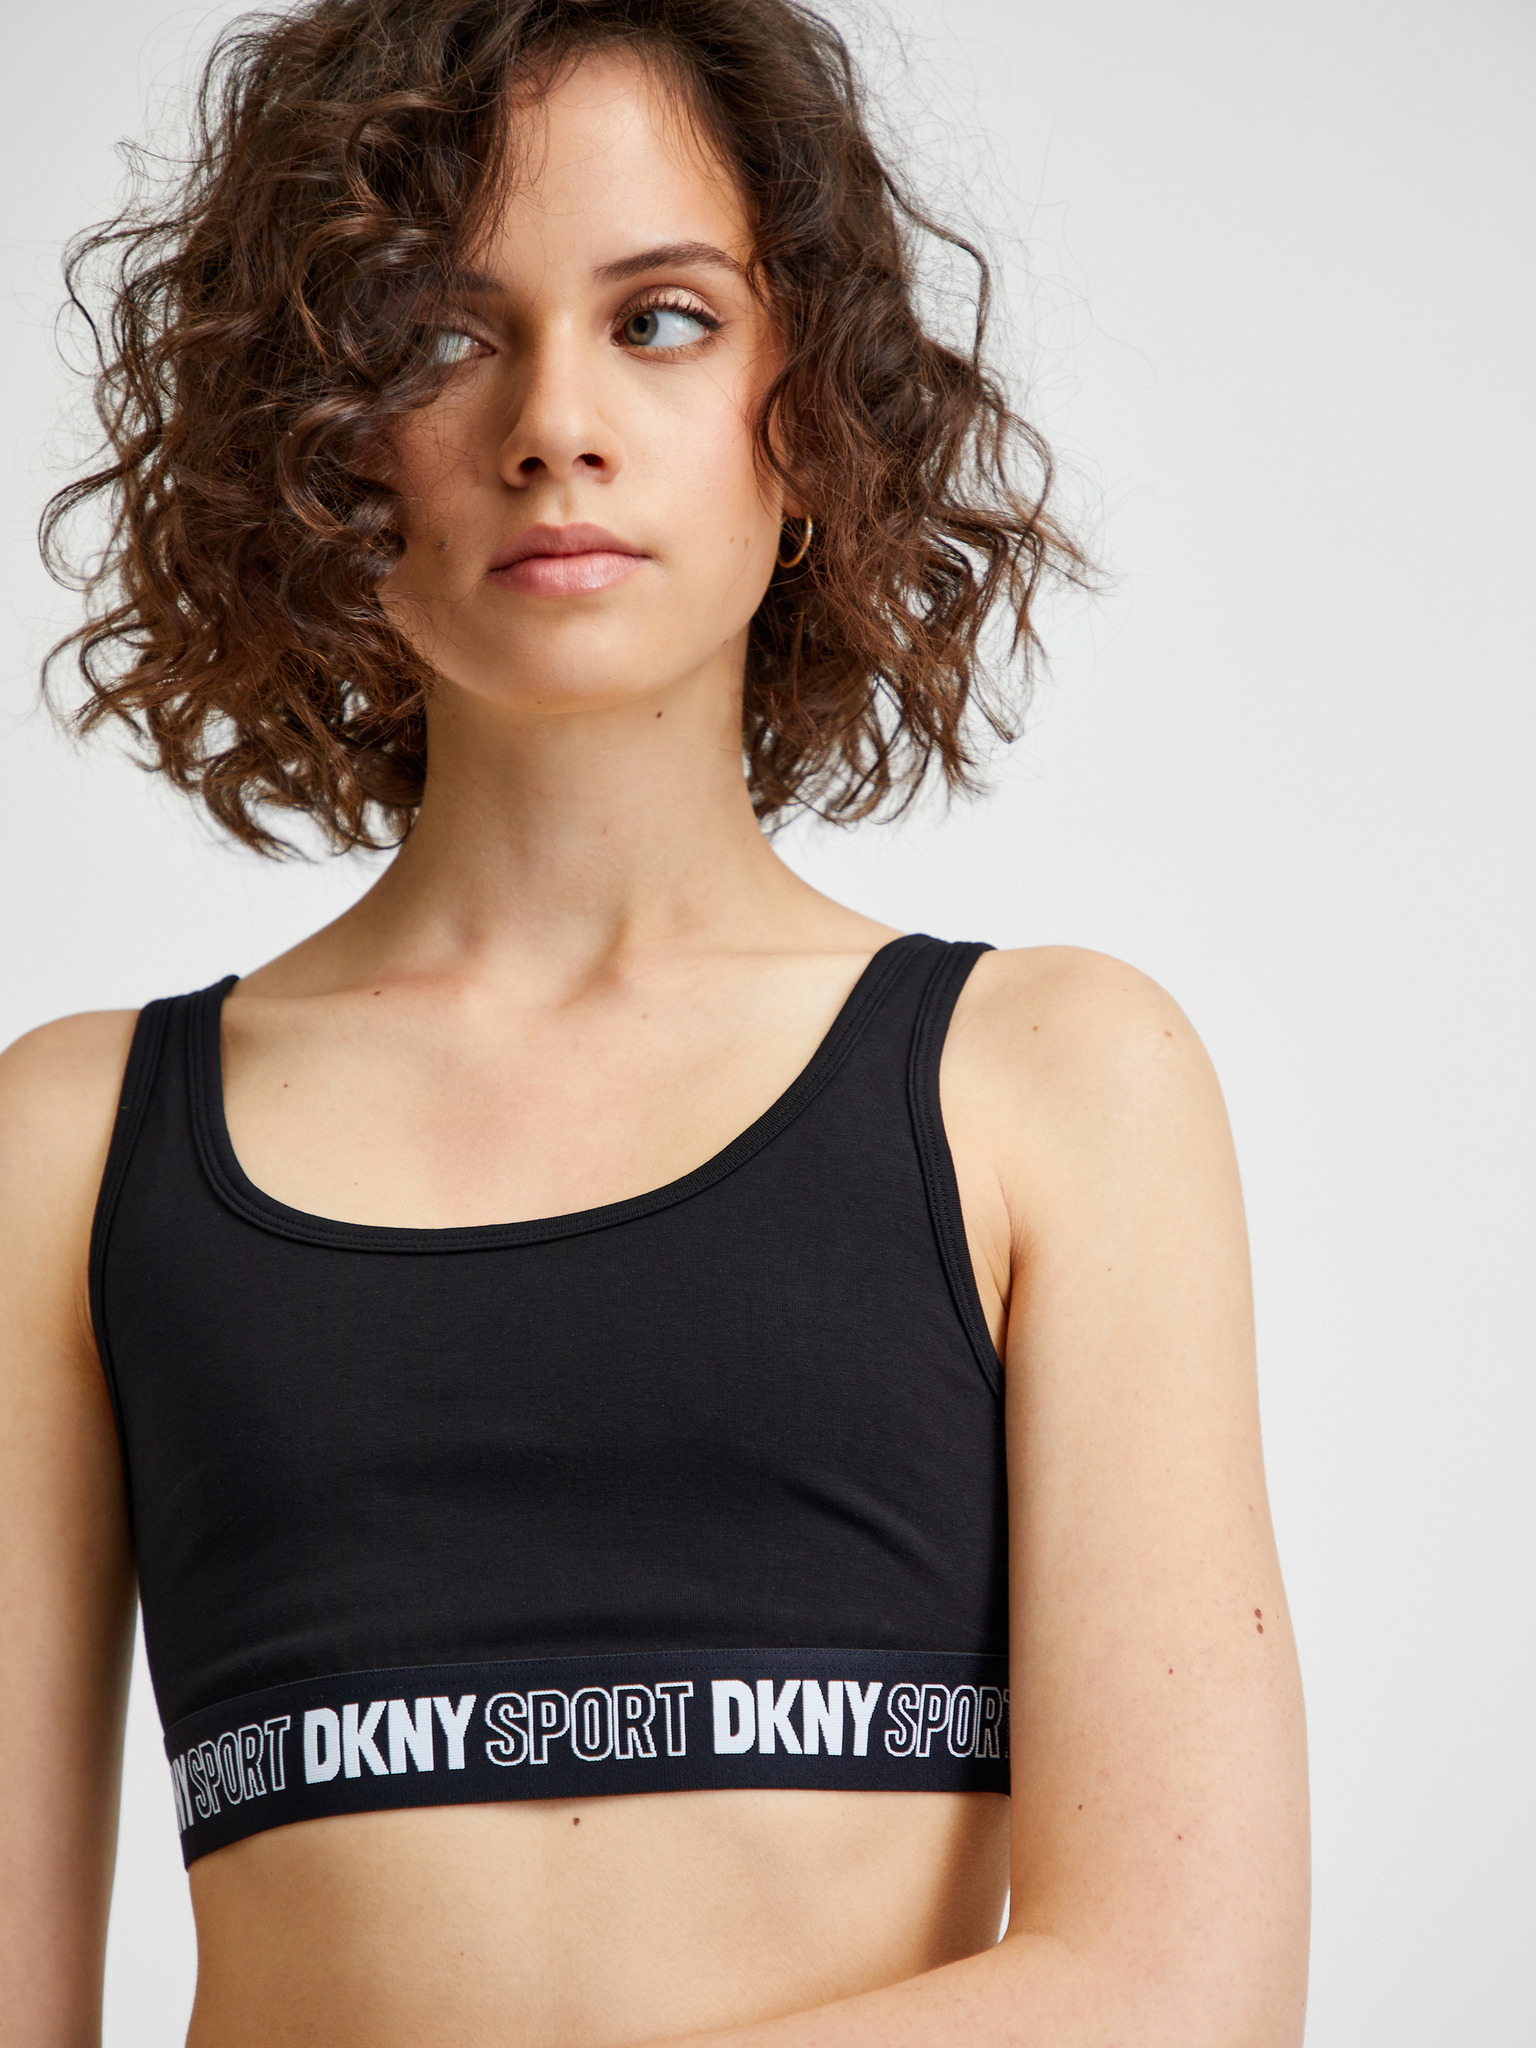 DKNY Nine West Active Womens Sports Bra Size Large Medium Black Removable  Cups - $11 New With Tags - From Ben